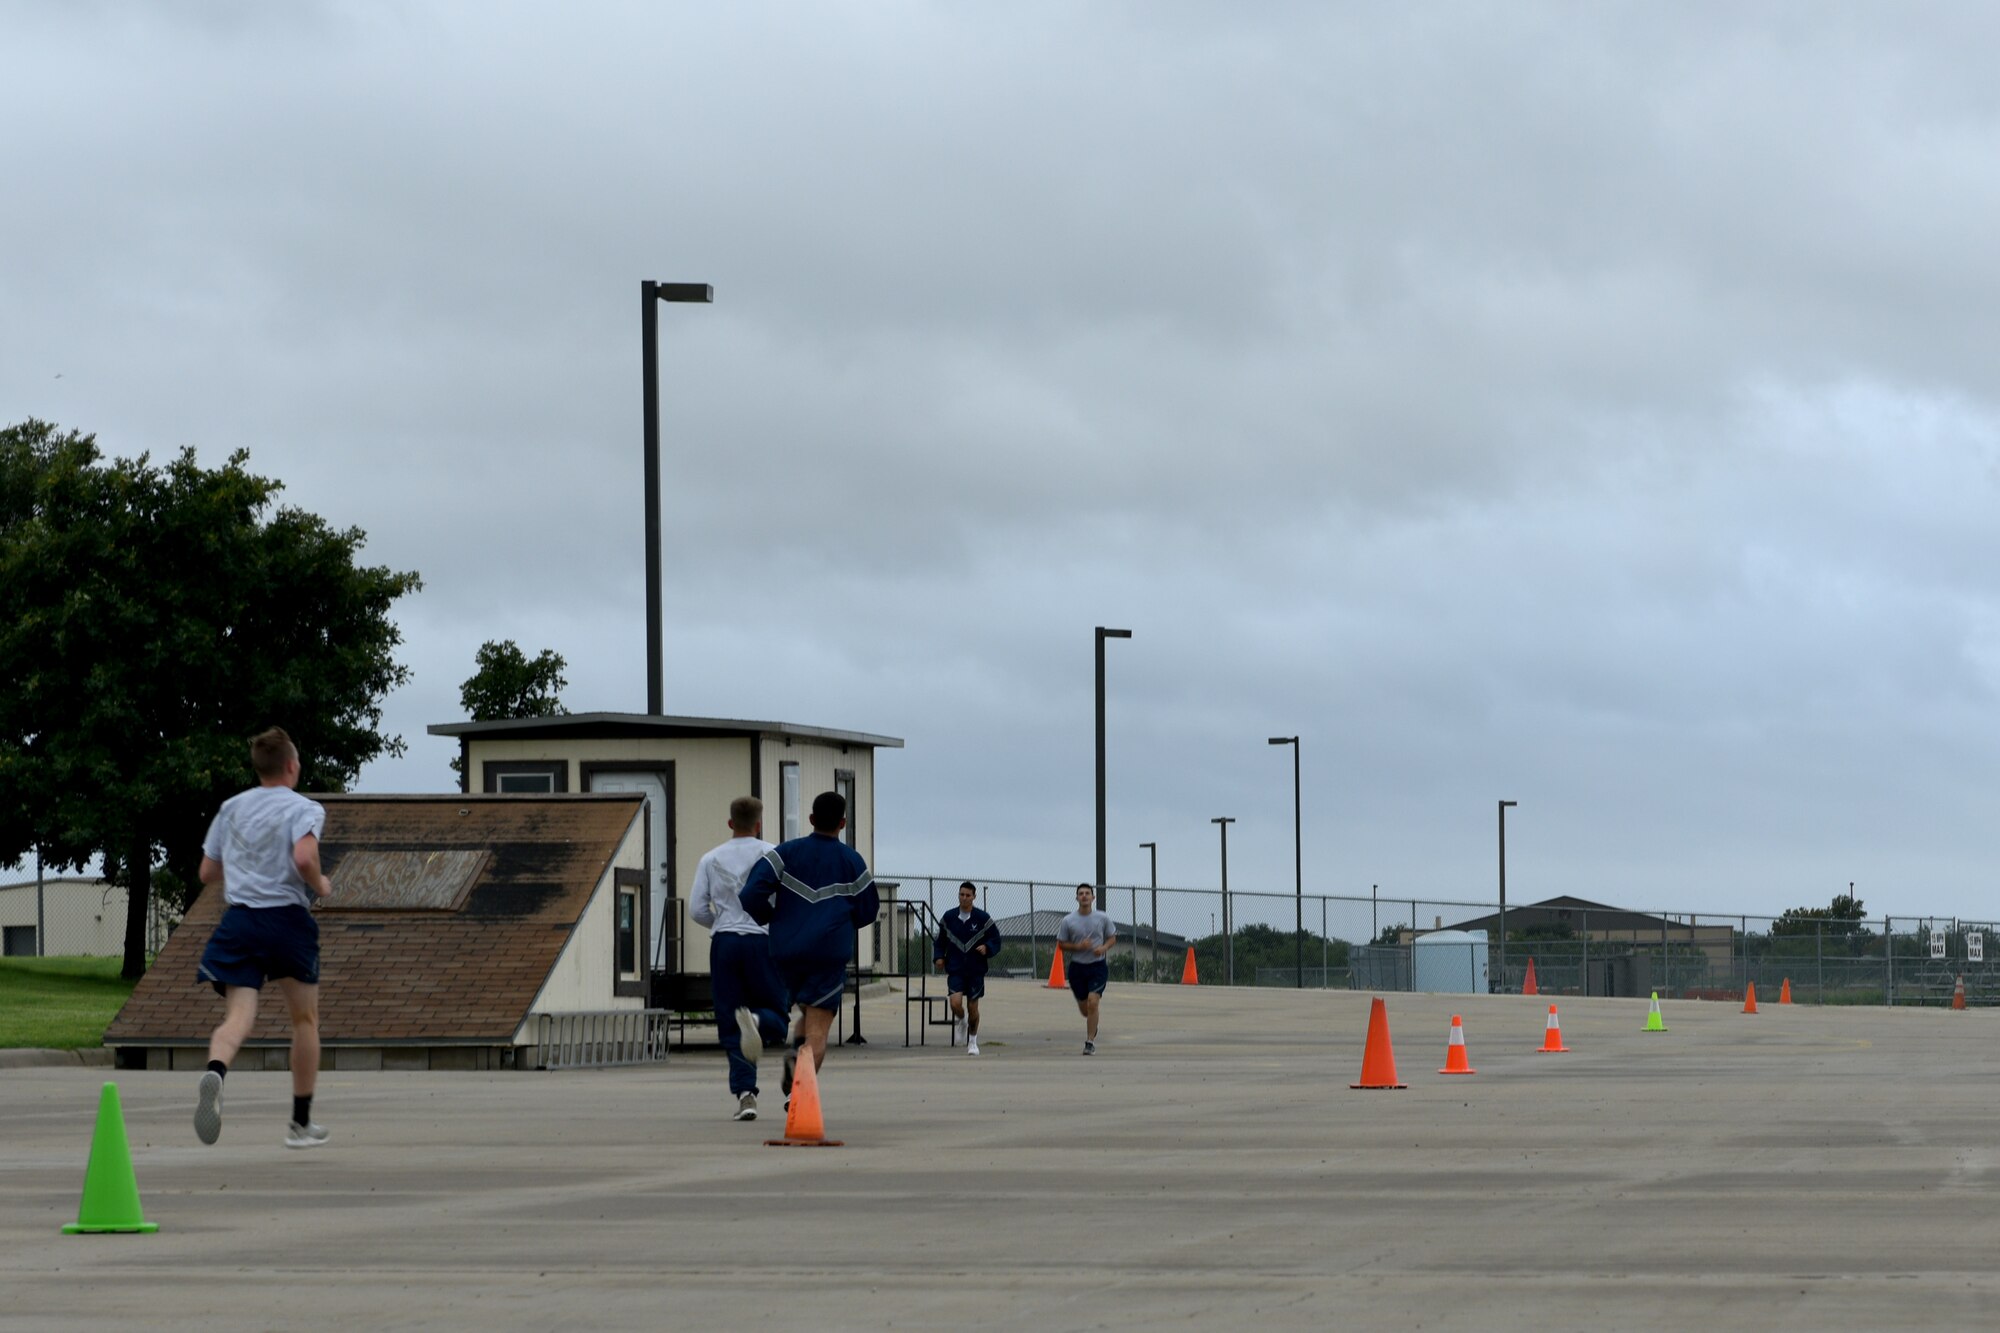 Participants run the final stretch of the Blood, Sweat and Stairs competition at the Louis F. Garland Department of Defense Fire Academy on Goodfellow Air Force Base, Texas, Sept. 22, 2018. The purpose of the event is to remind participants of the sacrifices of the emergency responders on September 11, 2001. (U.S. Air Force photo by Senior Airman Randall Moose/Released)